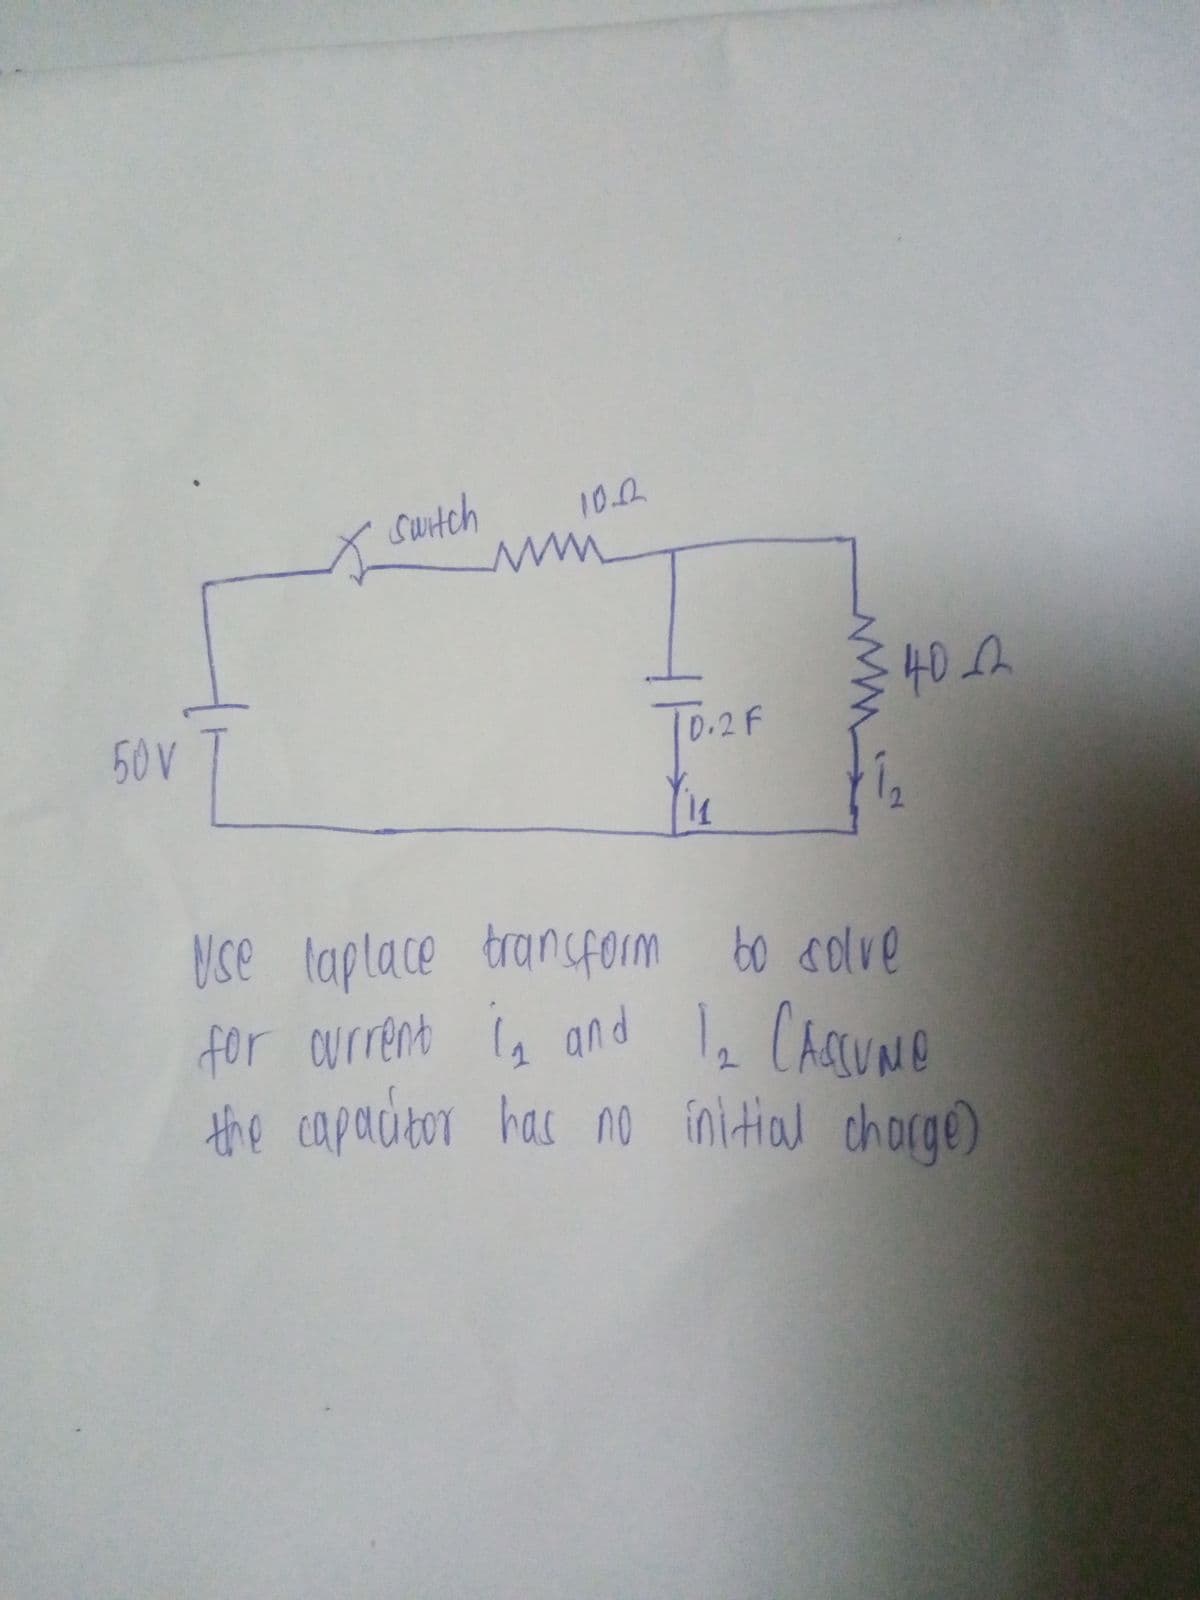 50V
Switch
10.0
wwwww
D.2 F
Yis
w
40.0
Use laplace
transform bo solve
for current 1₂ and 12 CASCUND
the capacitor has no initial charge)